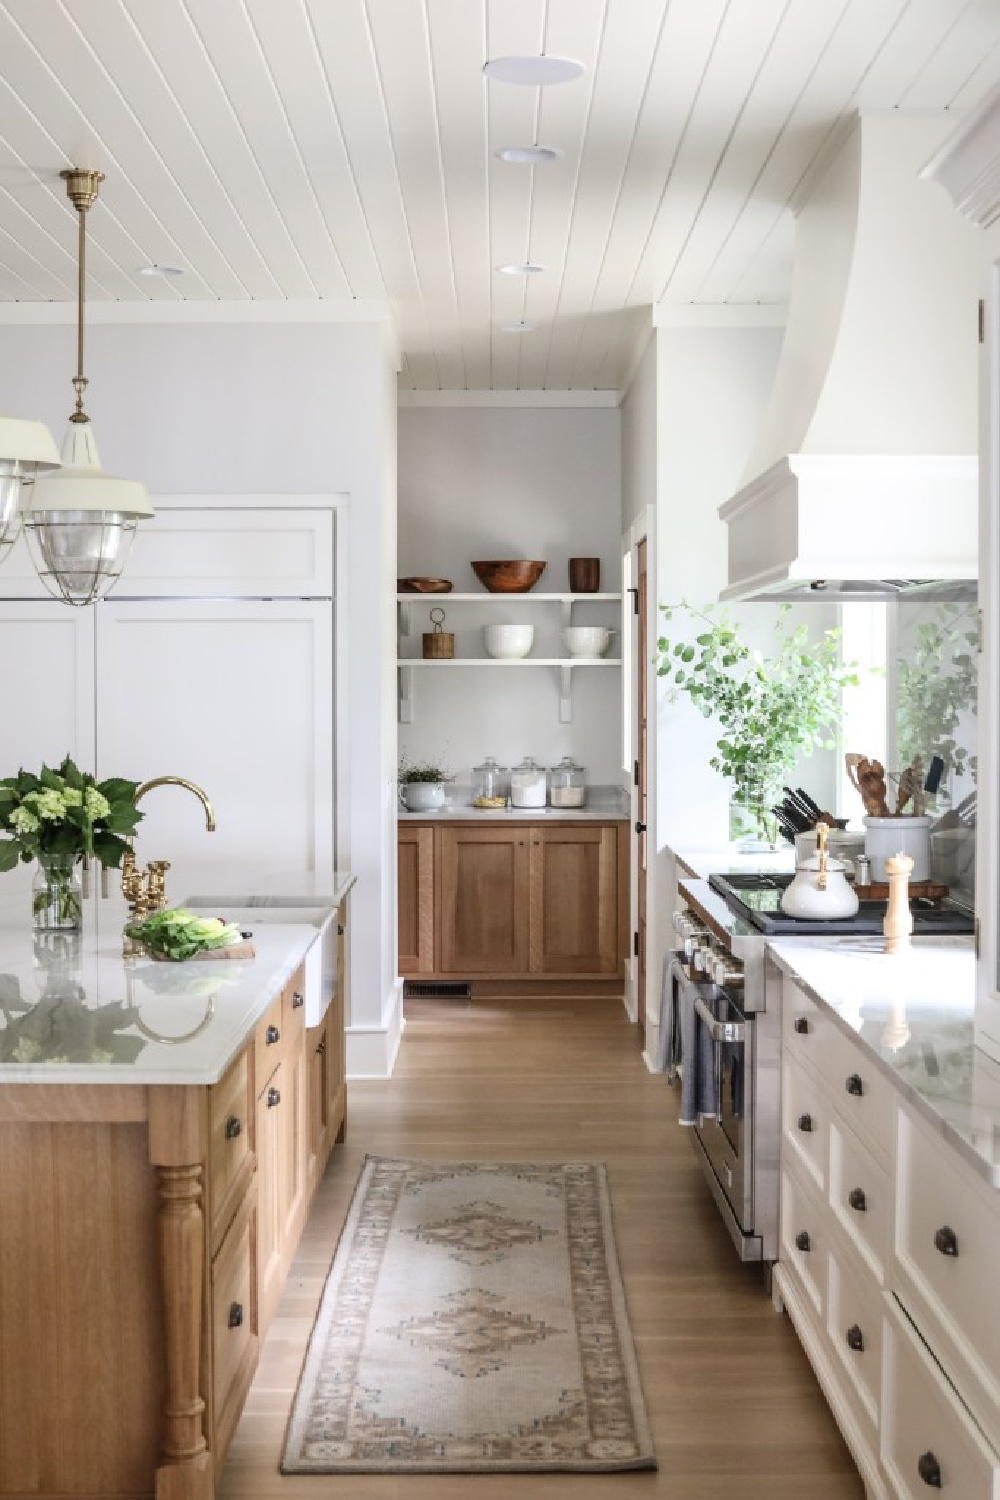 A magnificent timeless kitchen by Paark & Oak with wood stained island, coastal pendants, and white Shaker cabinets. Love the peek into the butler pantry! #whitekitchendesigns #classicwhitekitchen #traditionaldesign